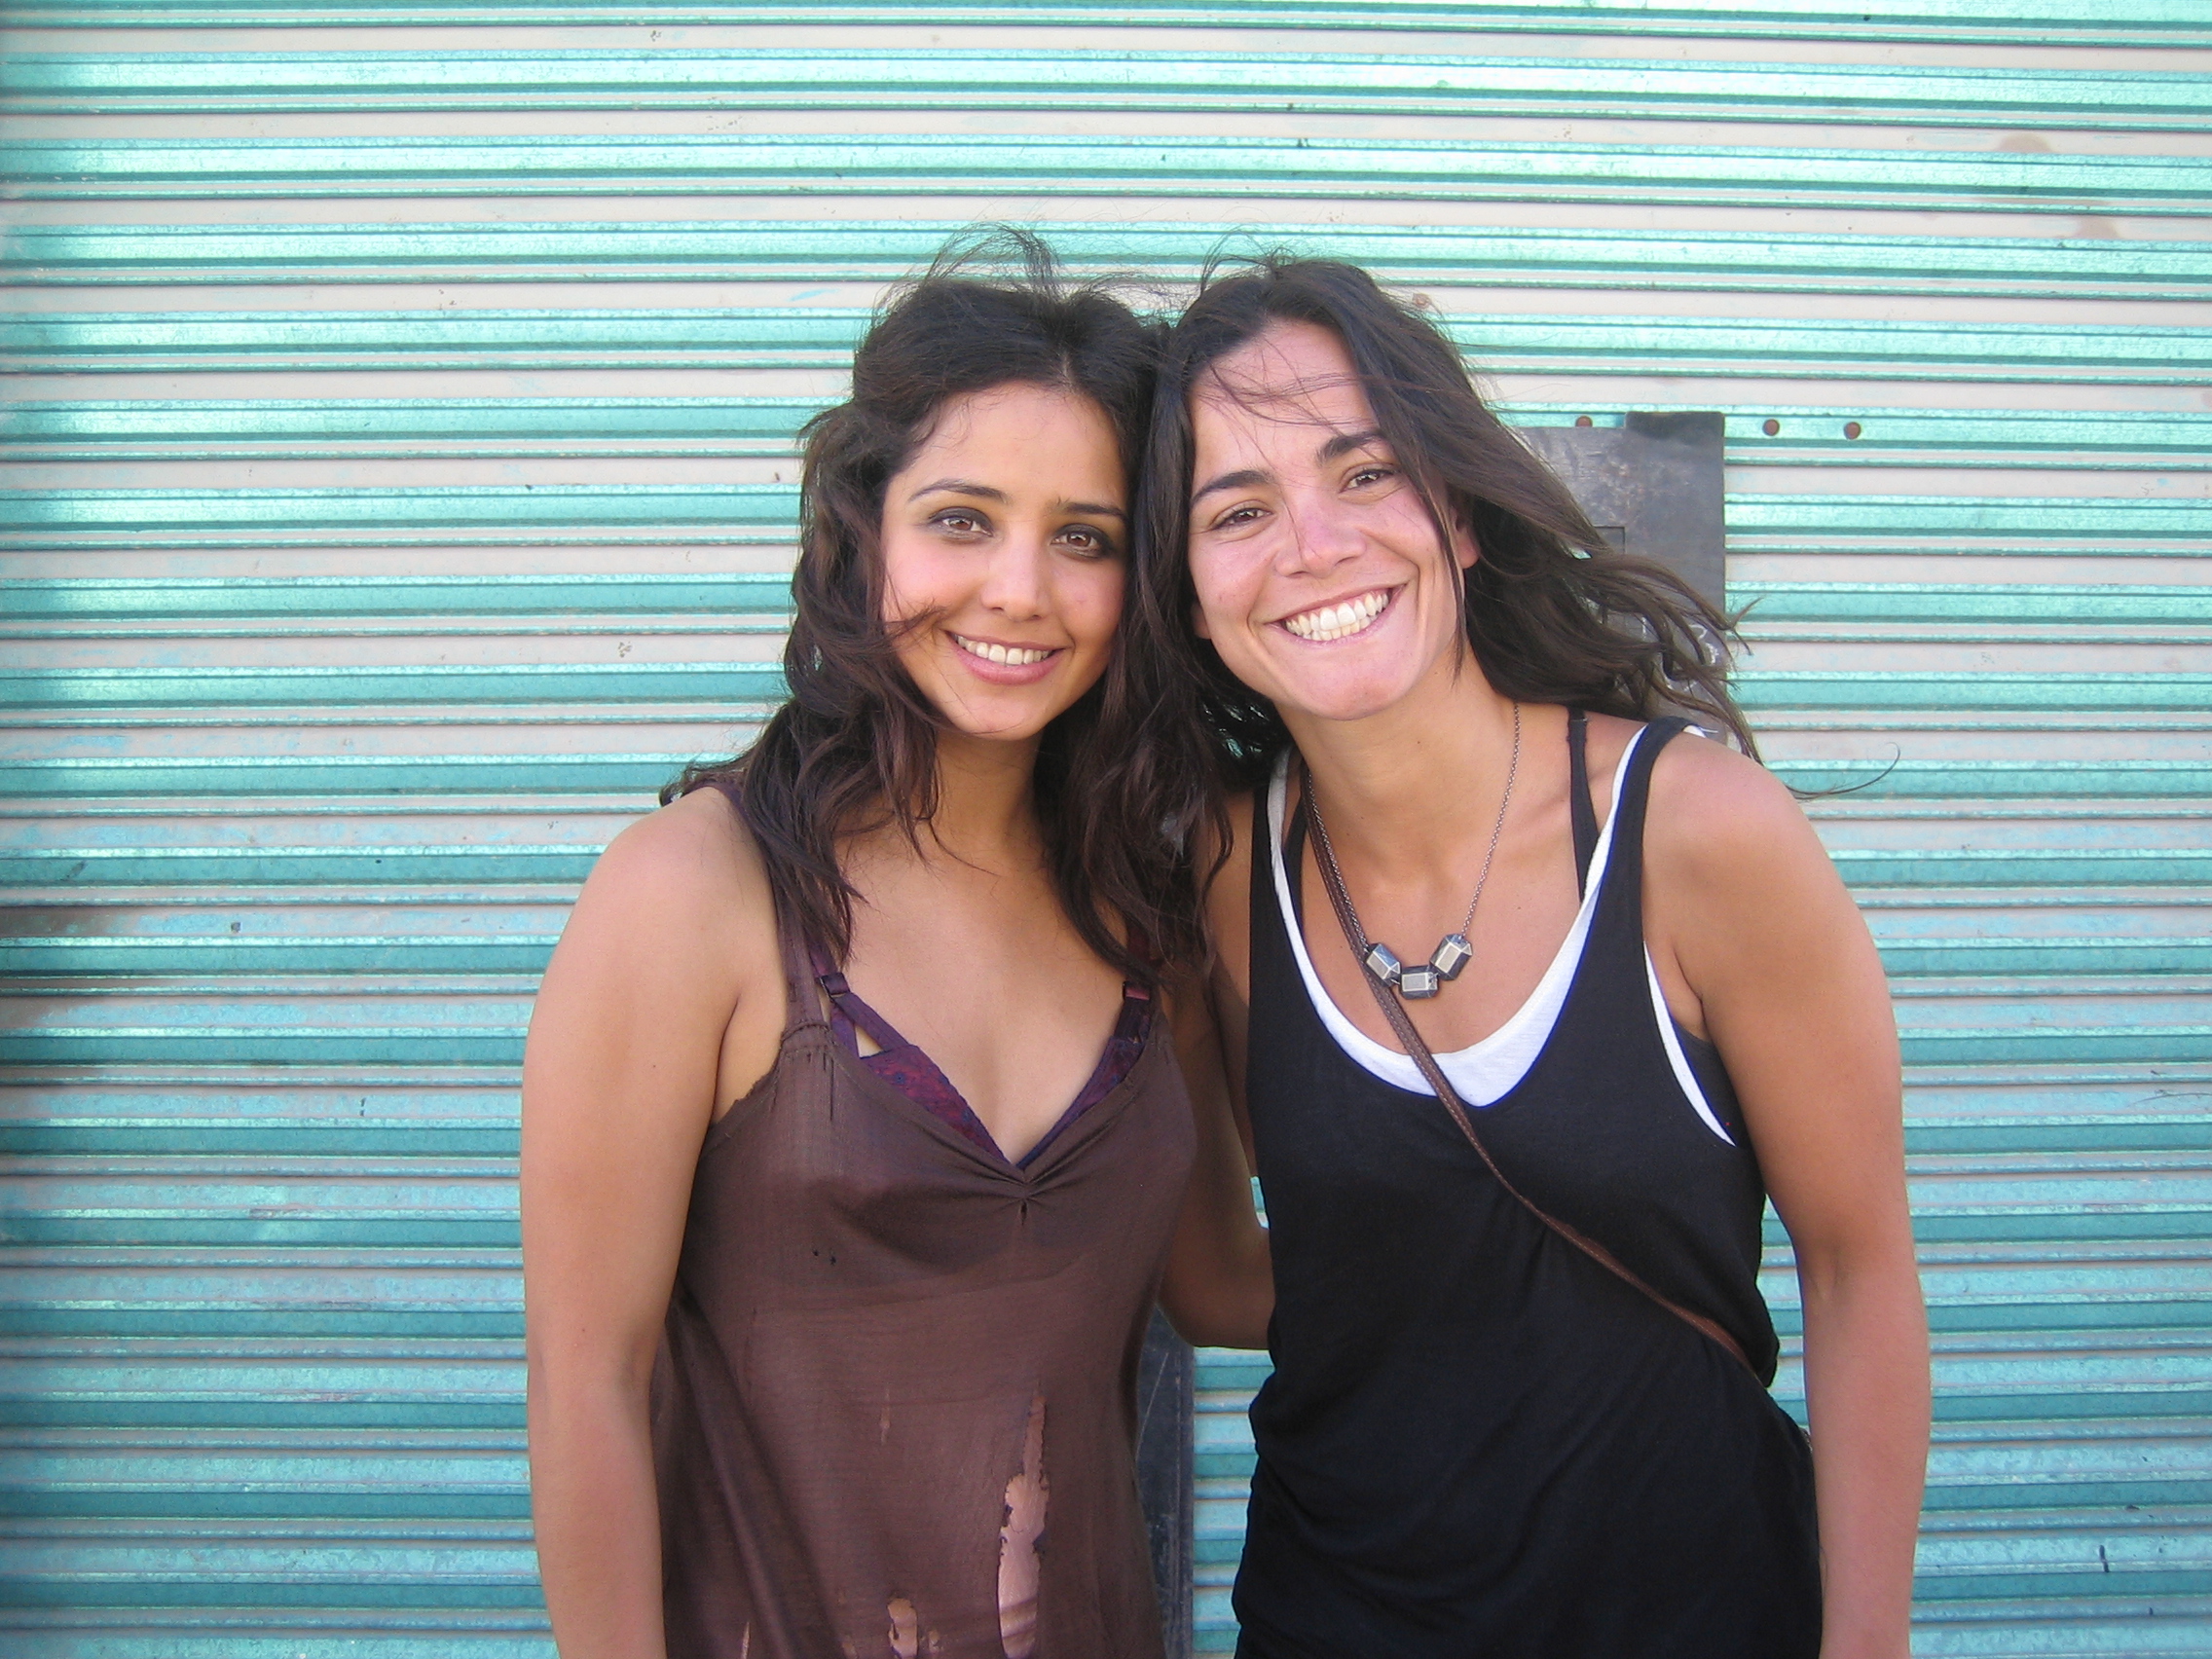 Set 'On the Road' with Alice Braga